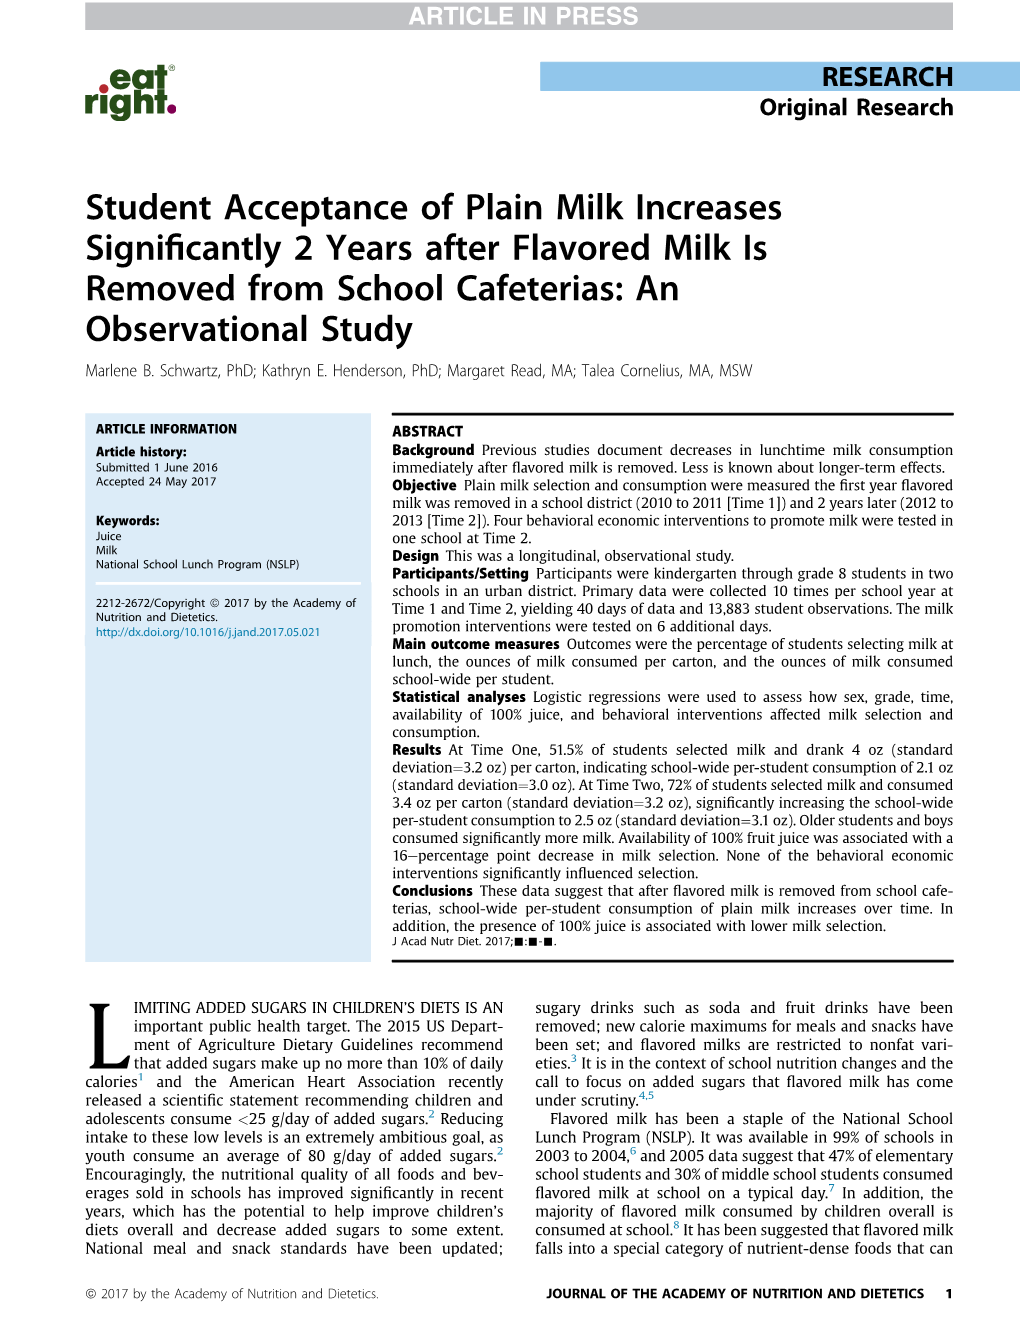 Student Acceptance of Plain Milk Increases Signiﬁcantly 2 Years After Flavored Milk Is Removed from School Cafeterias: an Observational Study Marlene B